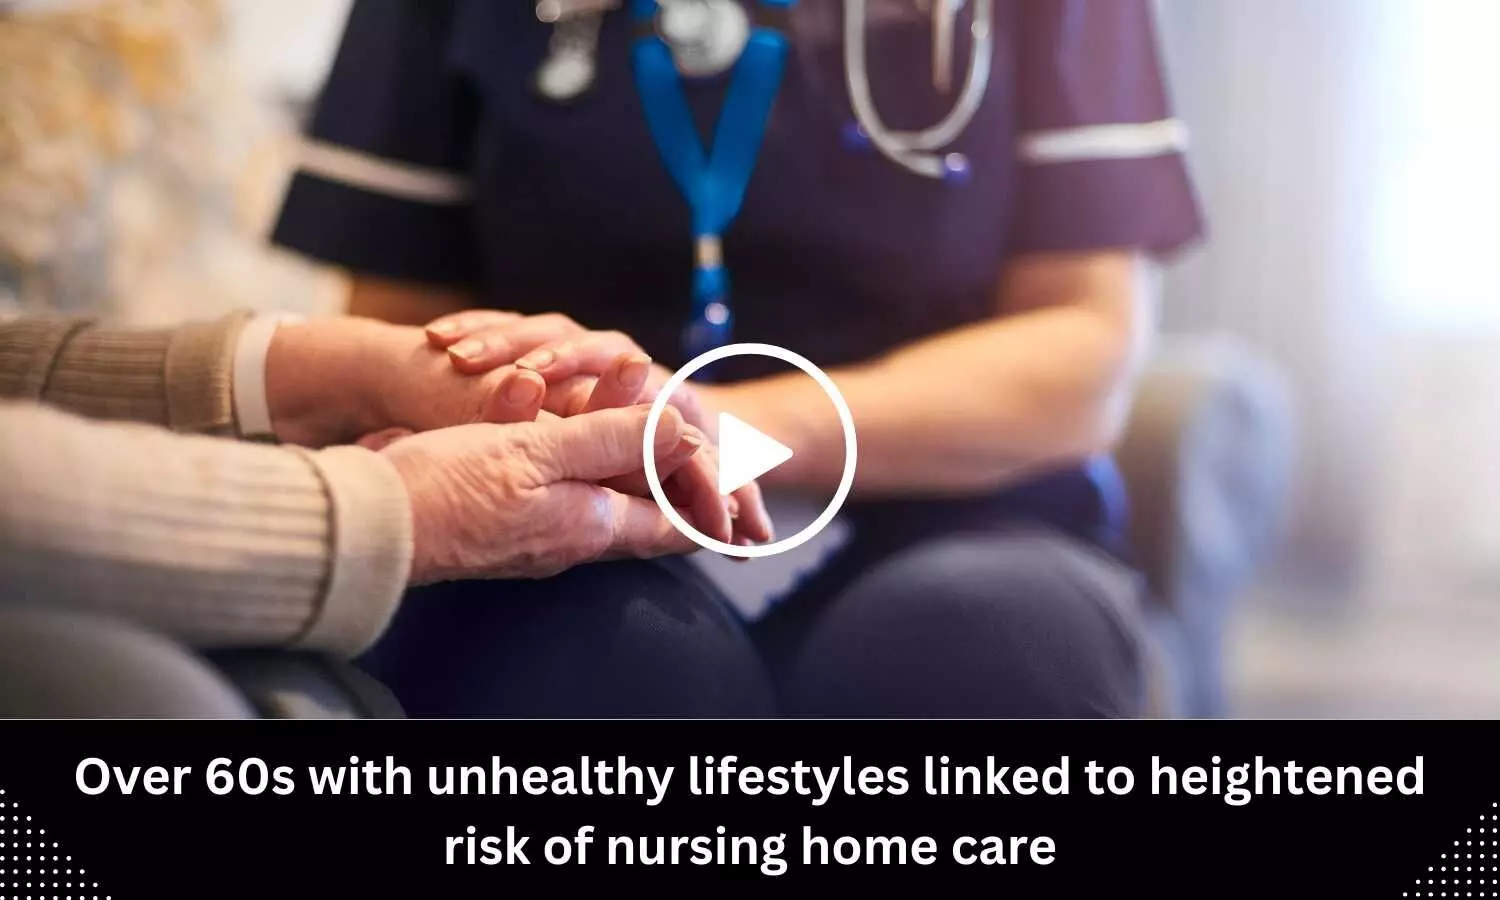 Over 60s with unhealthy lifestyles linked to heightened risk of nursing home care